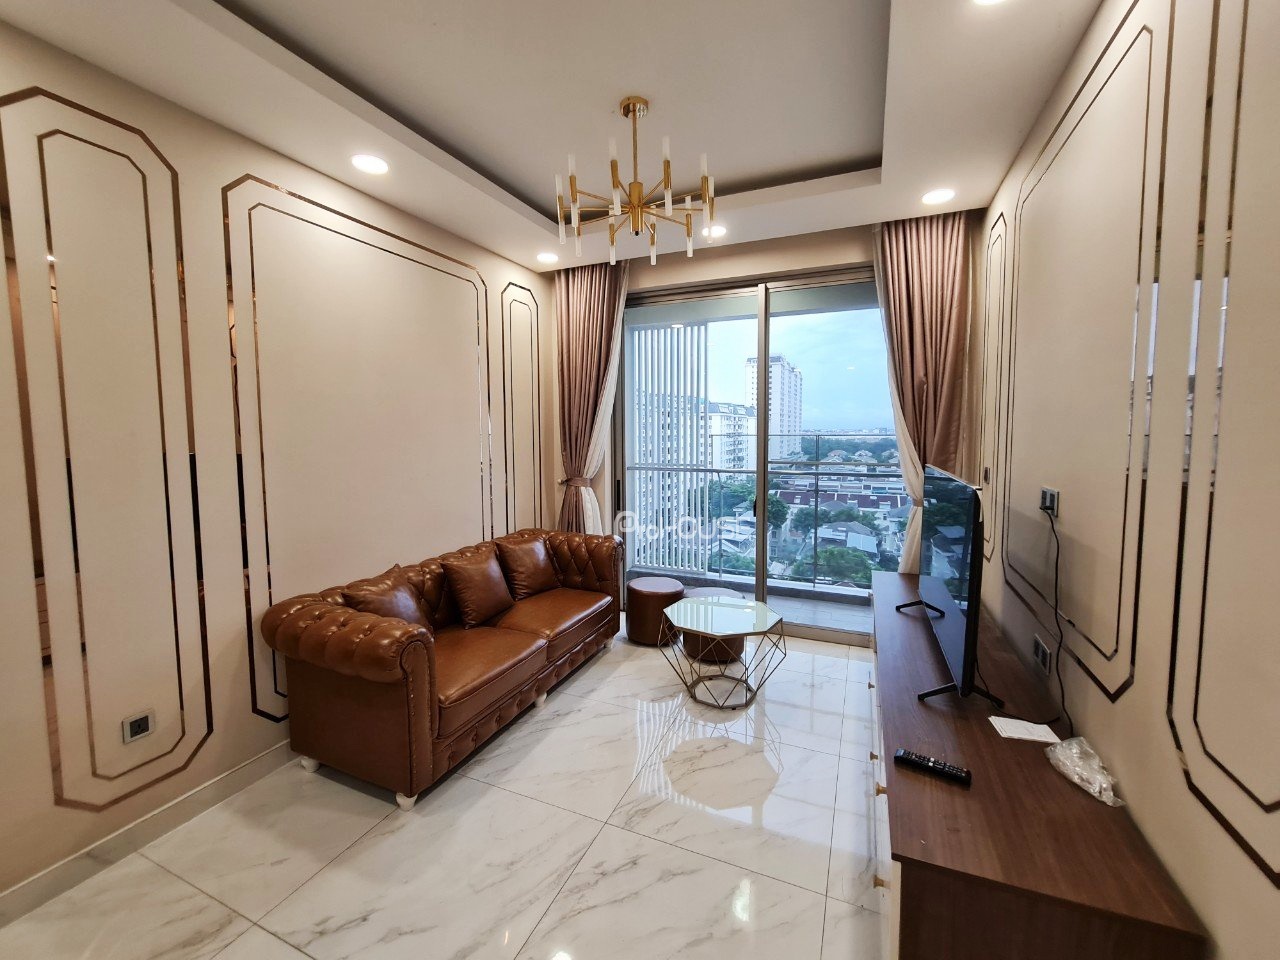 Super luxurious 2-bedroom apartment for rent in Midtown M6 with full furniture and beautiful view